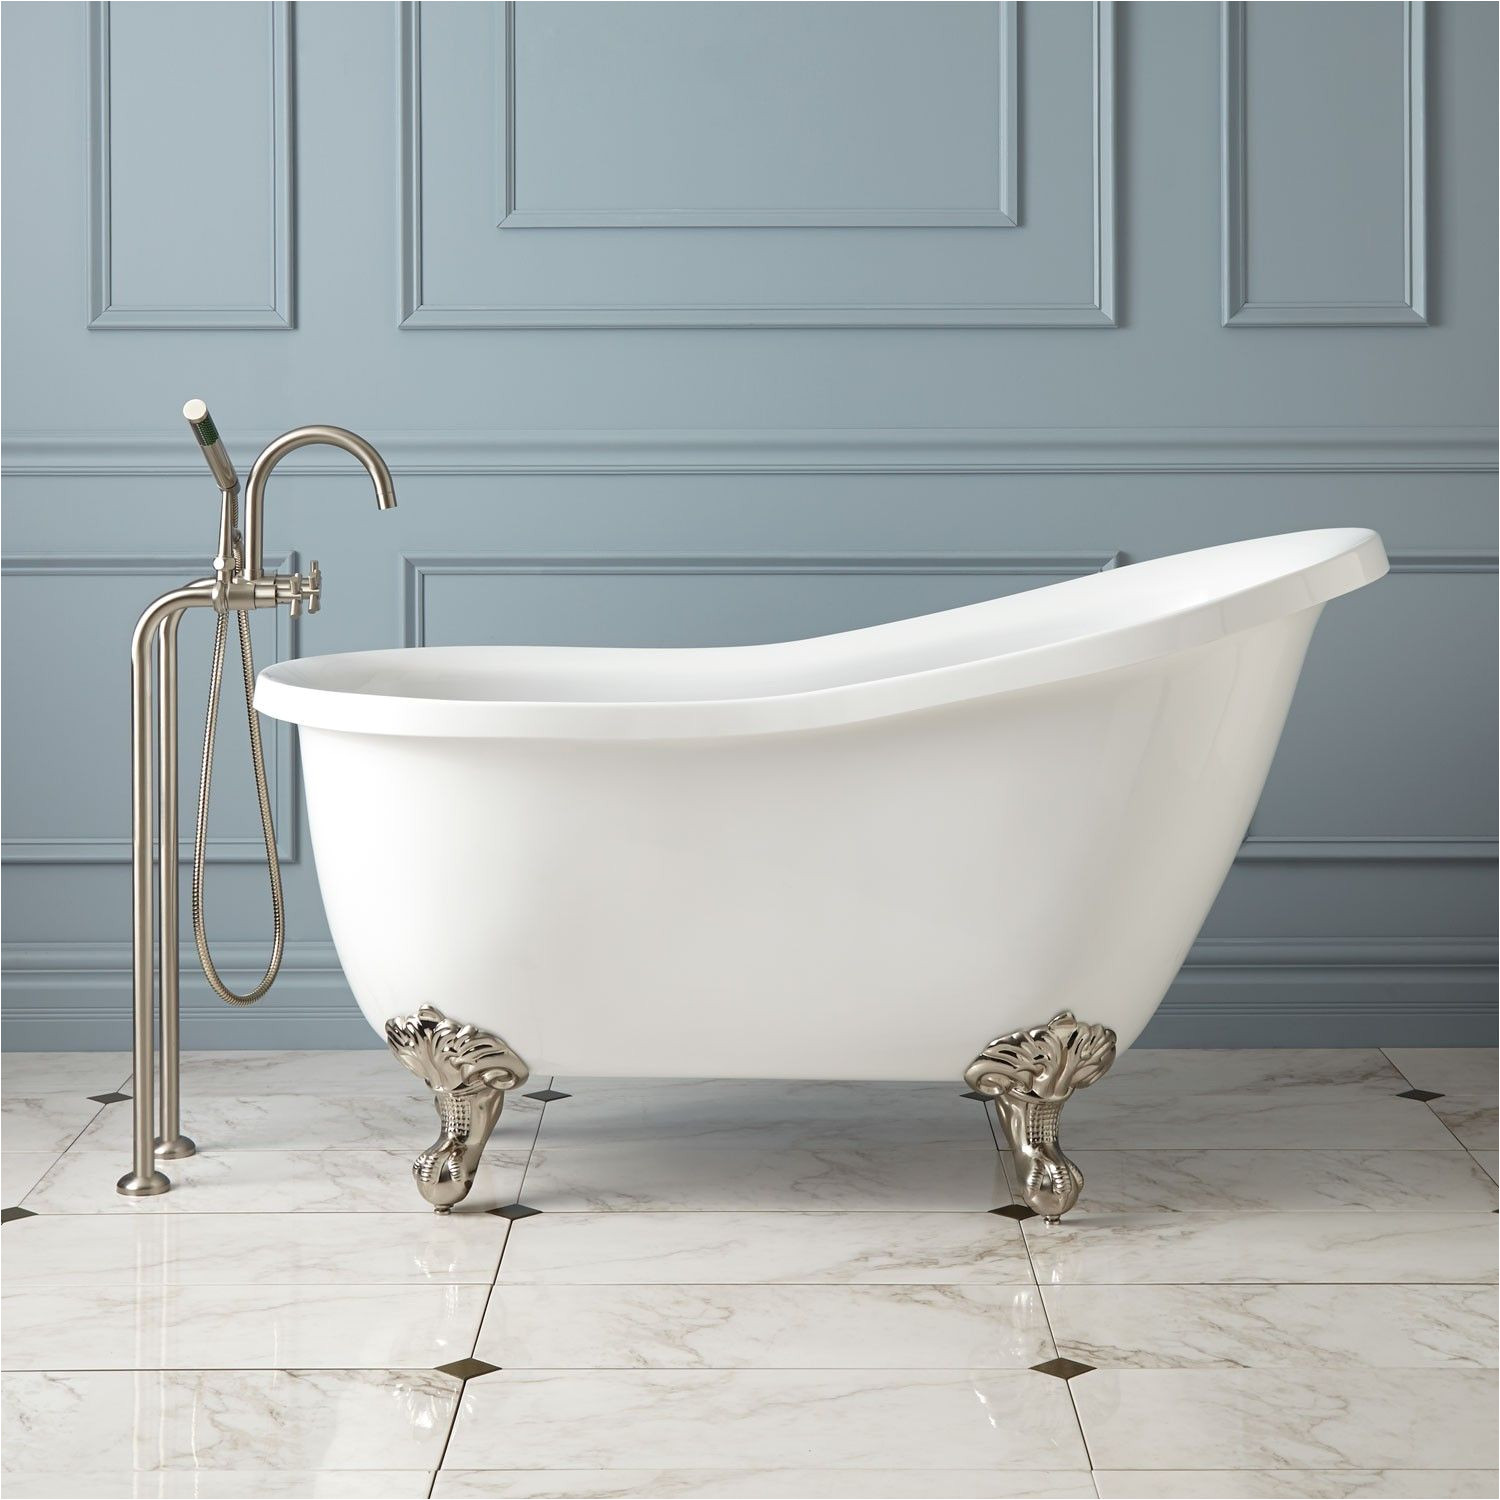 a 54 small scale clawfoot tub for real and it s cheaper than a replacement corner tub would be bathtubs